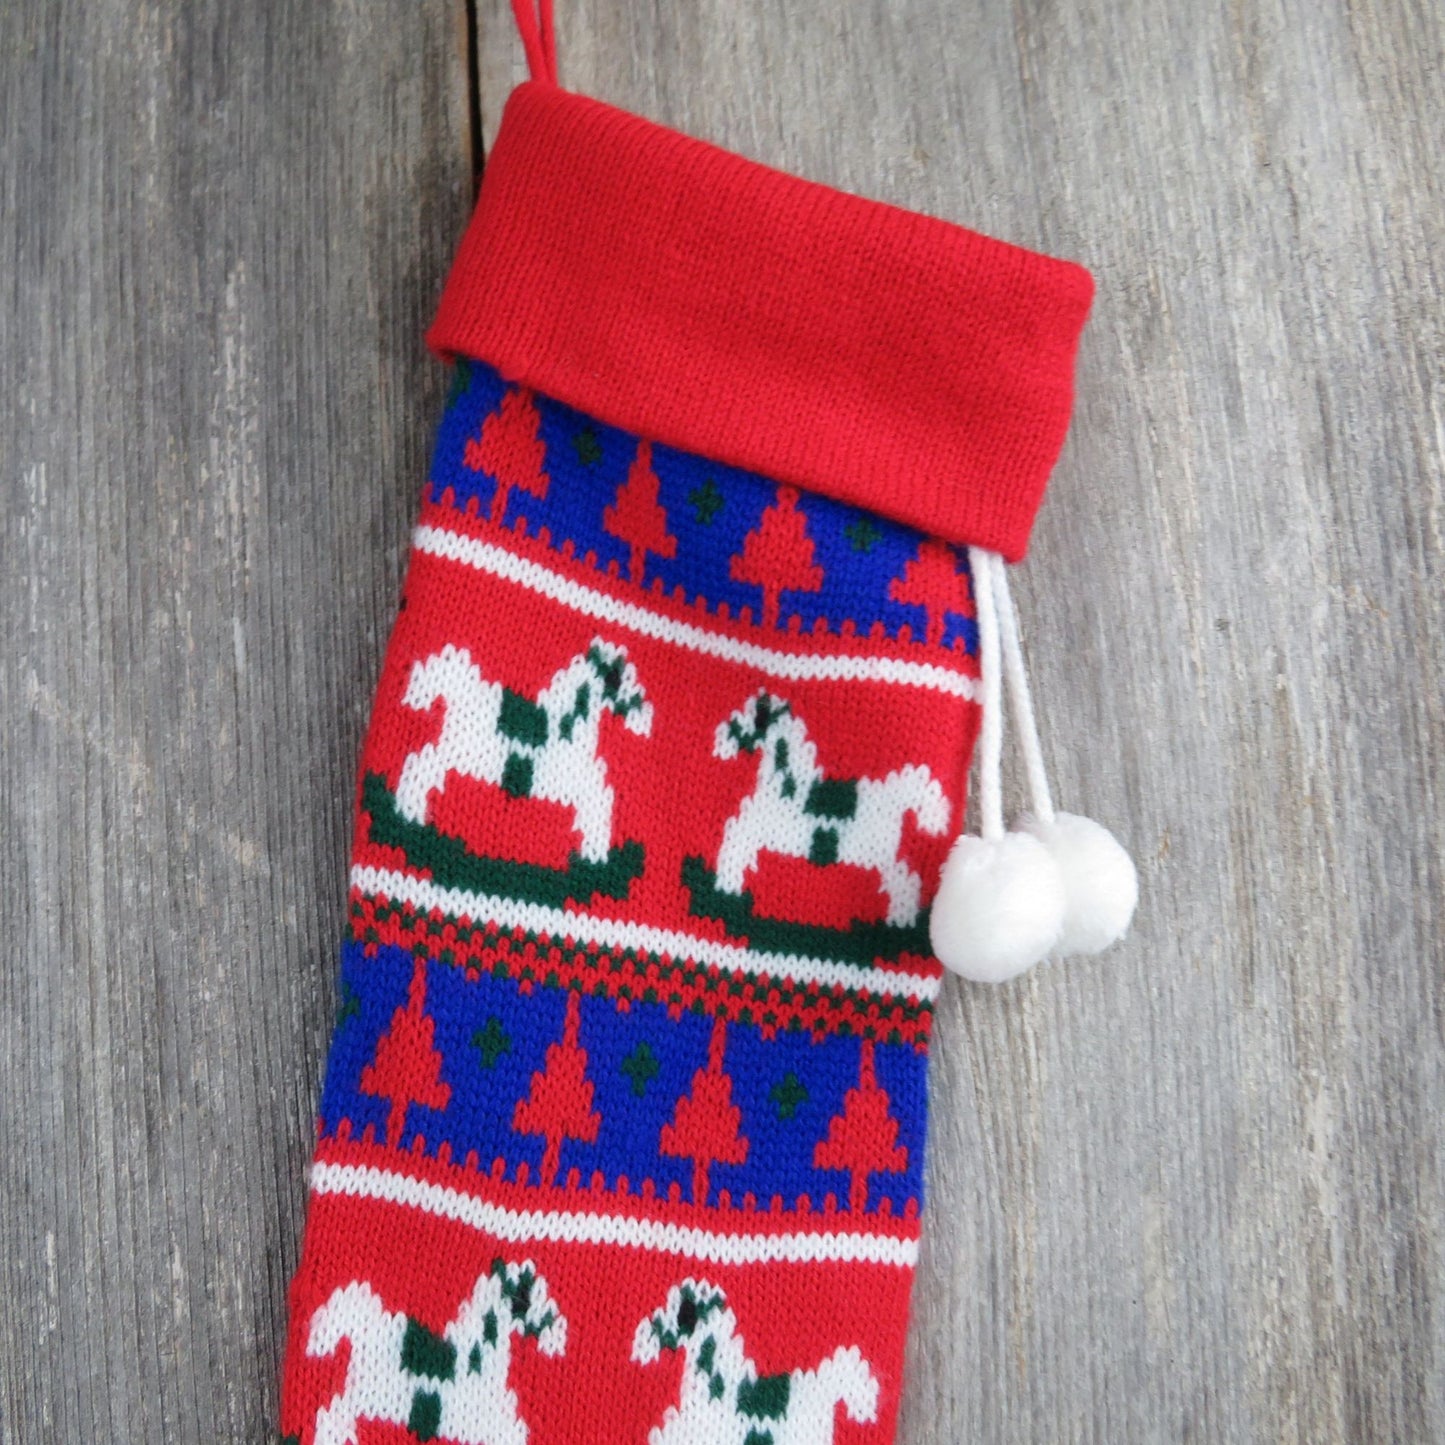 Vintage Rocking Horse Knit Stocking Christmas Knitted Red Blue White Holiday Home Decor